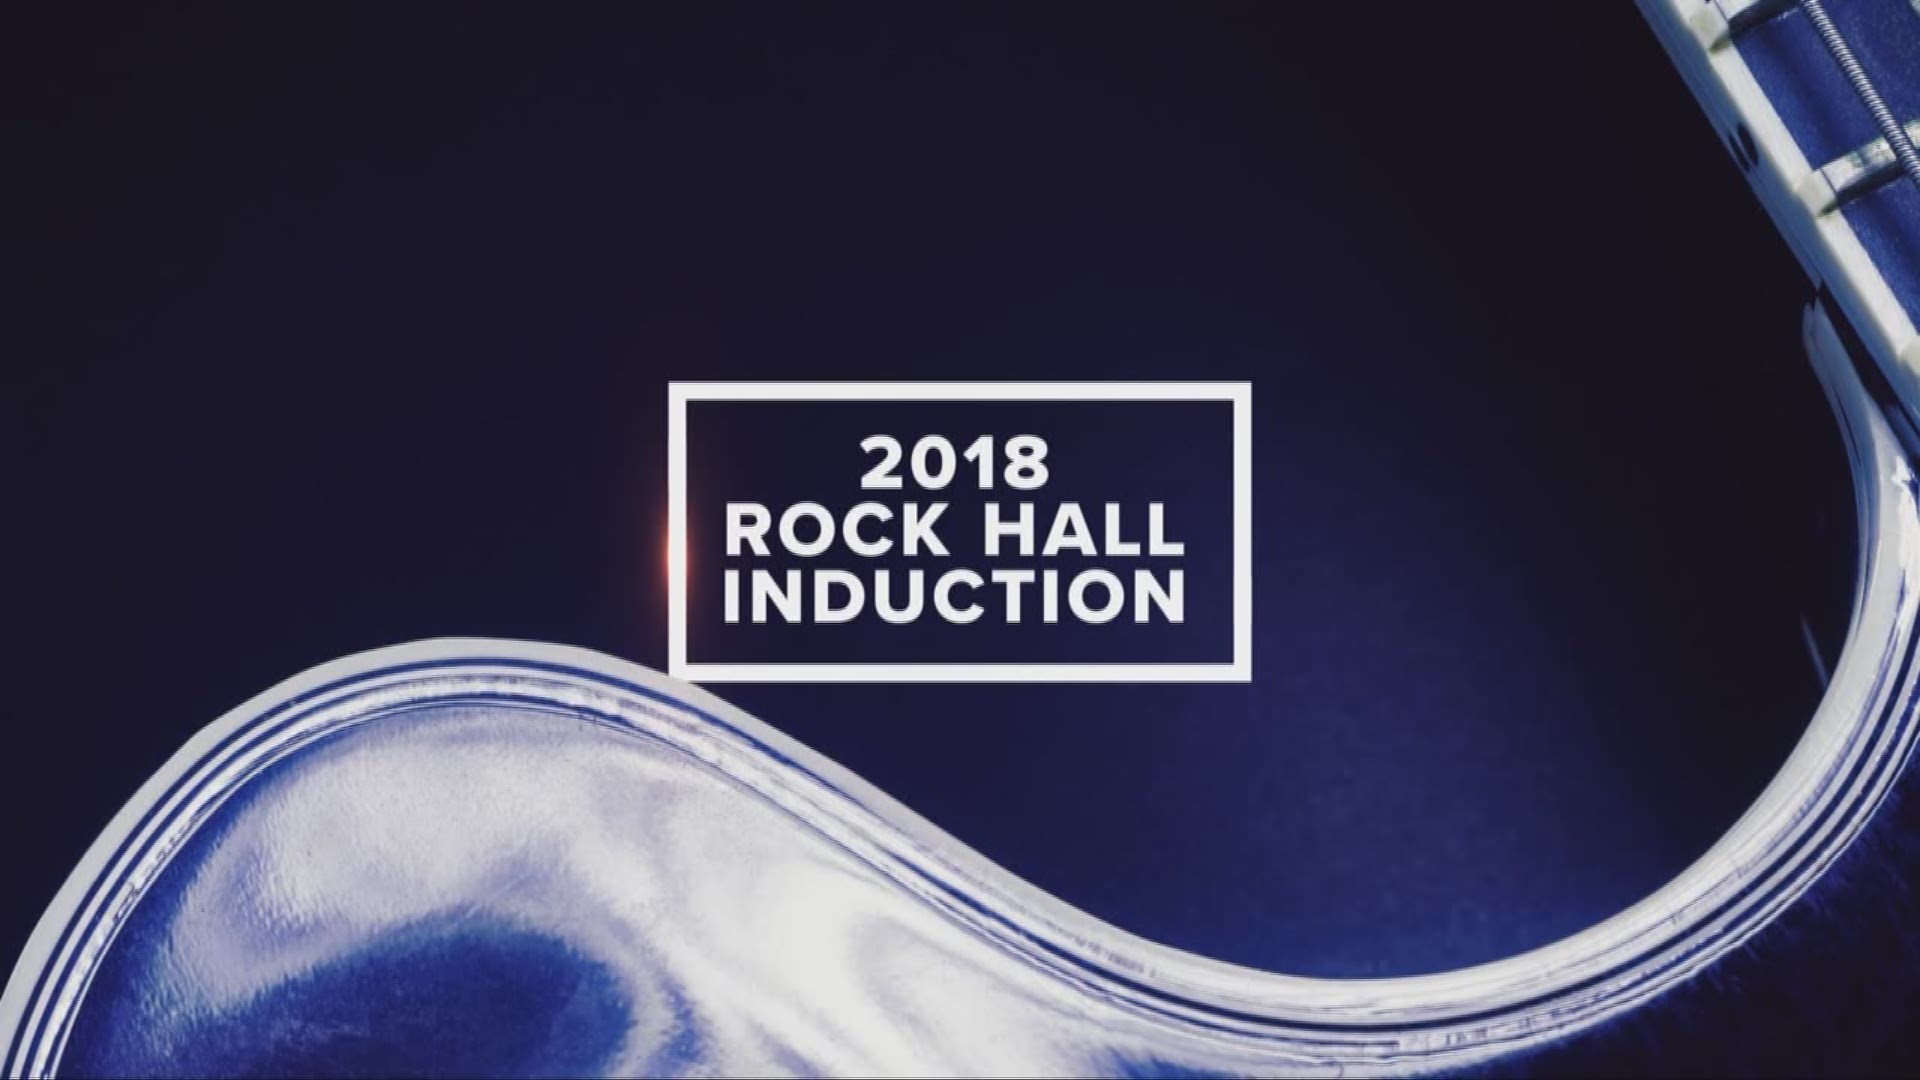 Cleveland readies for Rock Hall induction